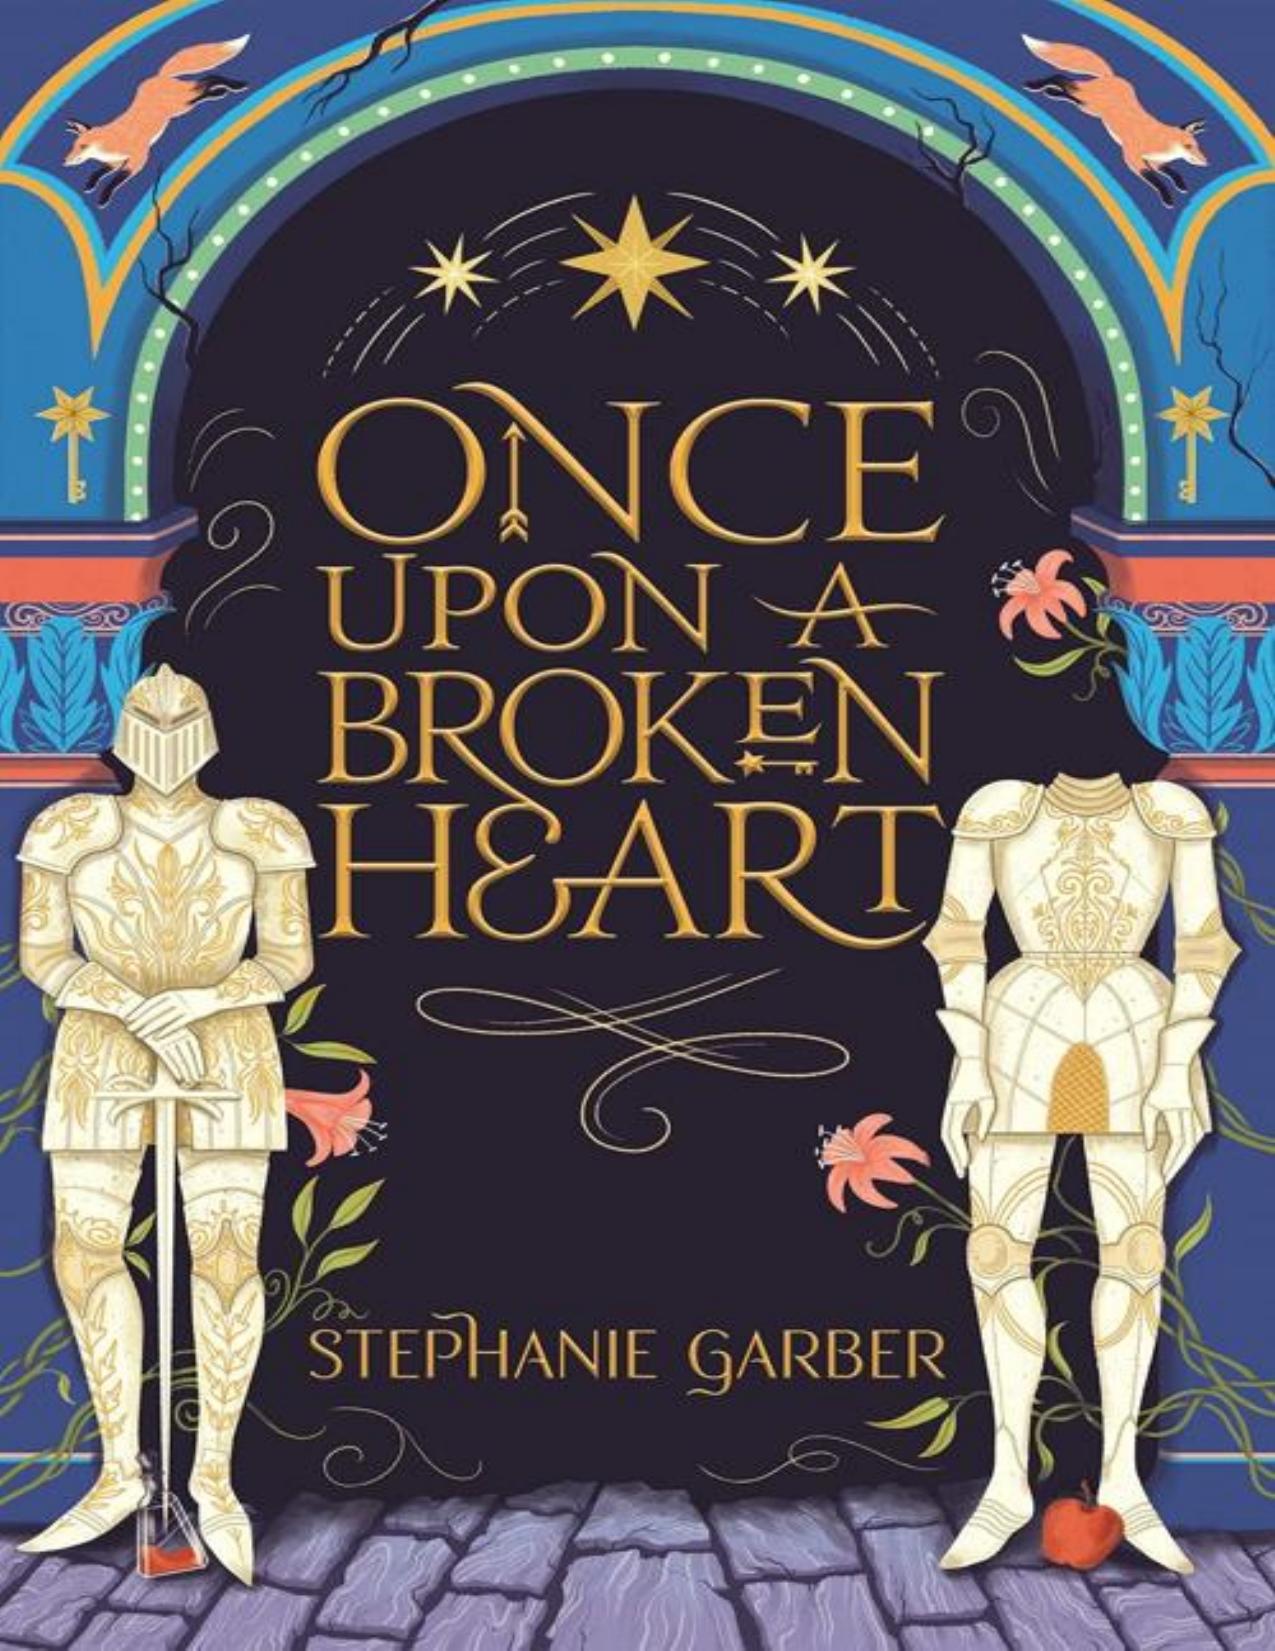 Once Upon a Broken Heart by Stephanie Garber